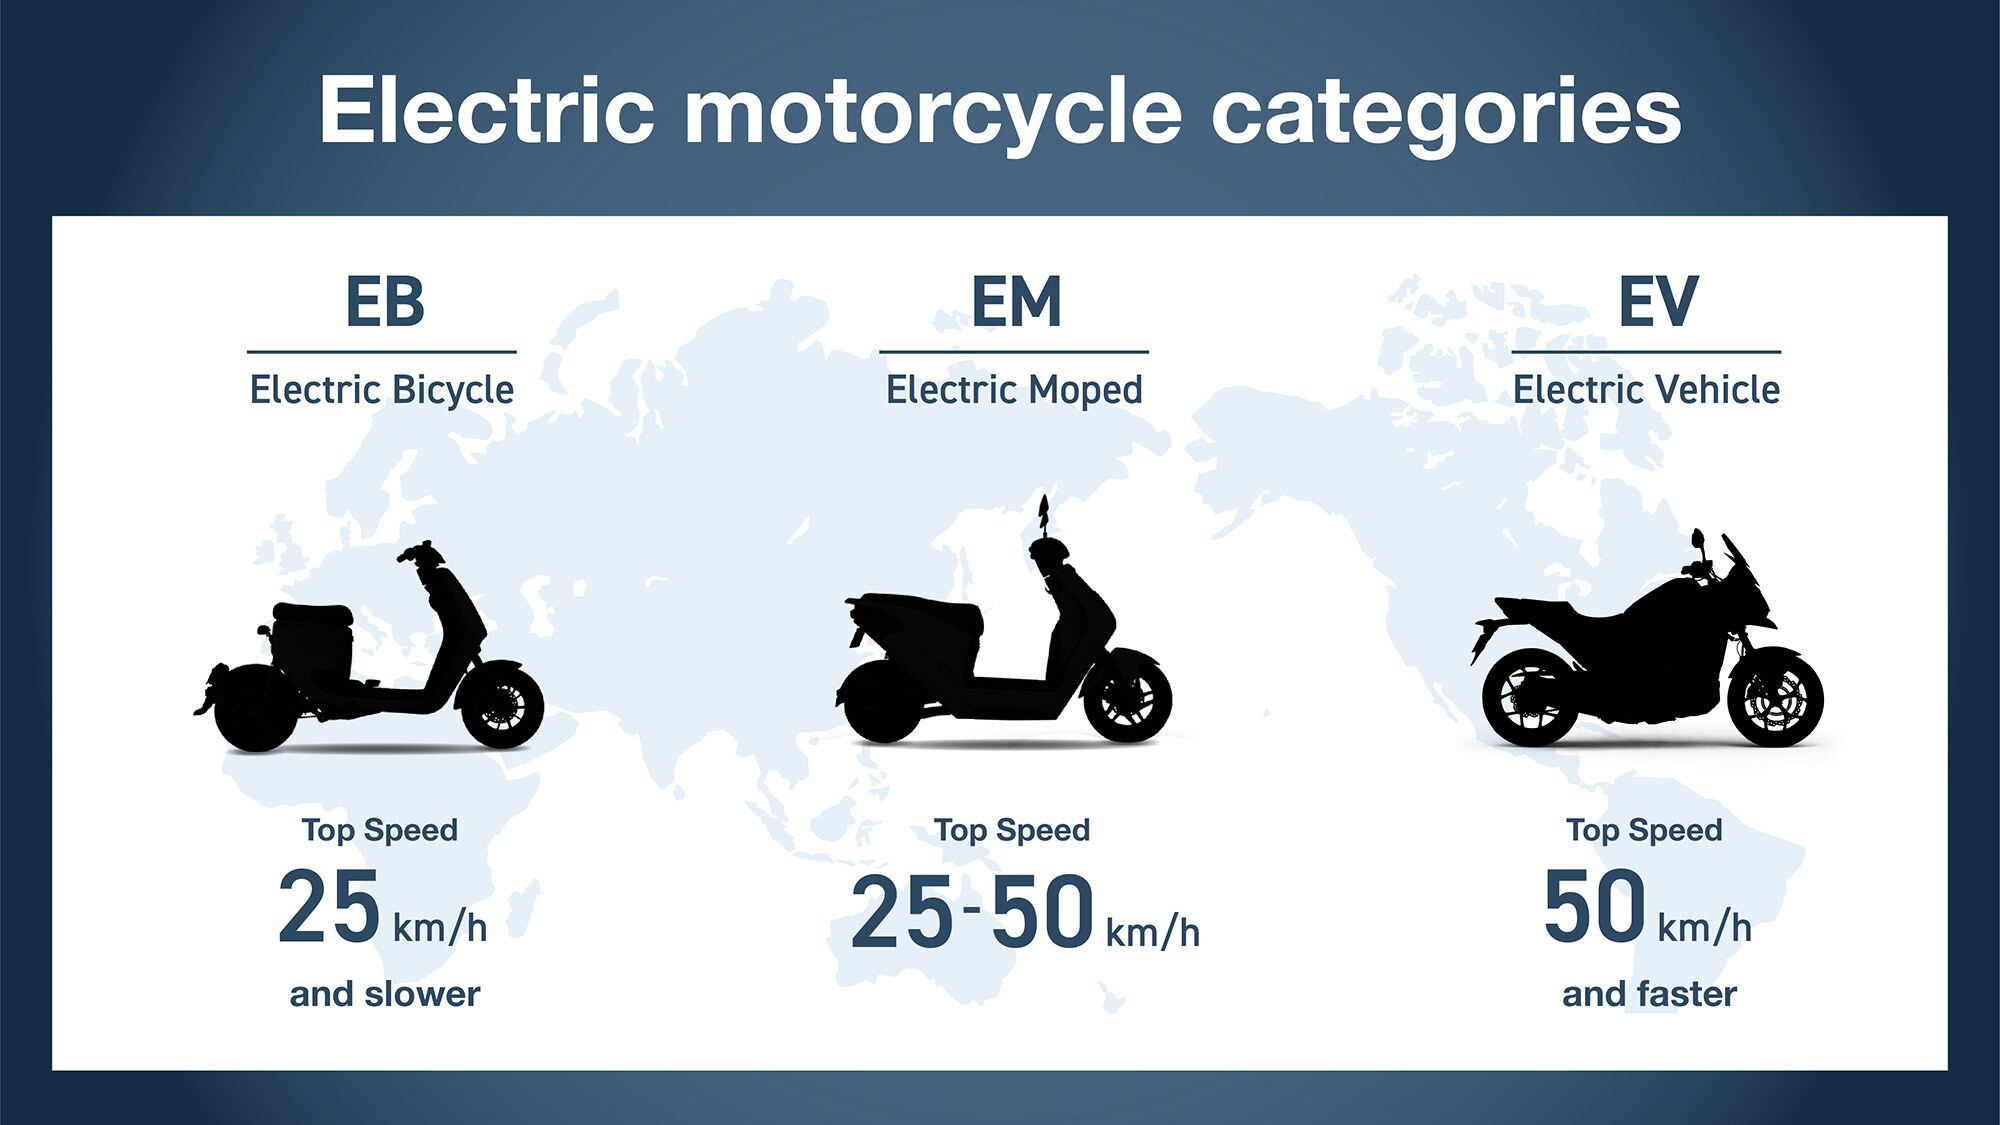 Honda breaks its two-wheel electric line into three categories.